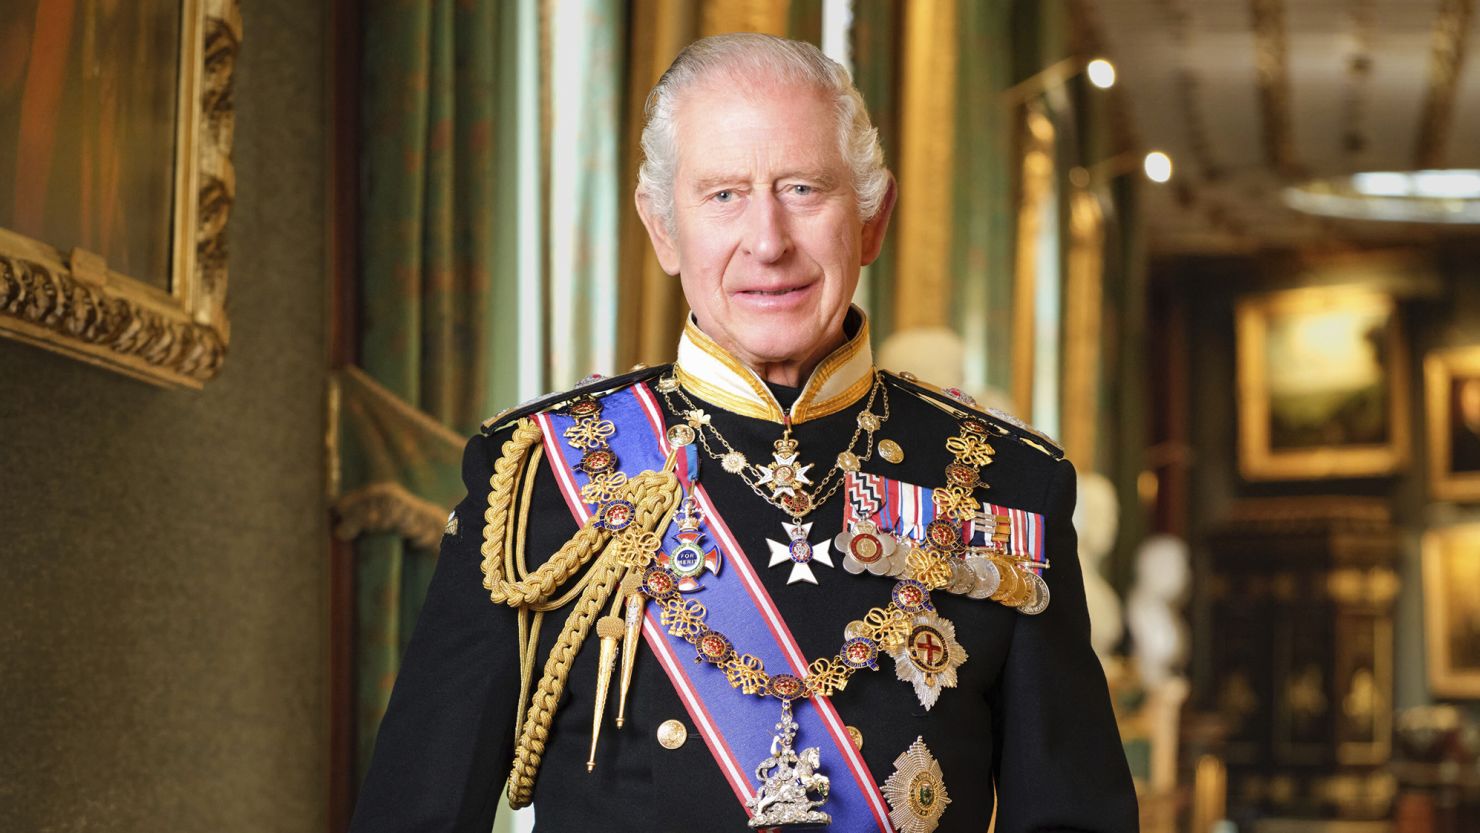 This photo provided by the Buckingham Palace on Monday, Jan.15, 2024 is the new official portrait of Britain's King Charles III  taken in 2023 at Windsor Castle, England. Copies of the portrait will hang in public buildings throughout the United Kingdom as part of a Government-funded scheme. King Charles III is wearing a Royal Navy uniform of an Admiral of the Fleet and official medals and decorations. A copy of the portrait is being offered to public authorities free-of-charge as part of a scheme to celebrate the new reign. (Hugo Burnand/Royal Household 2024 via AP)